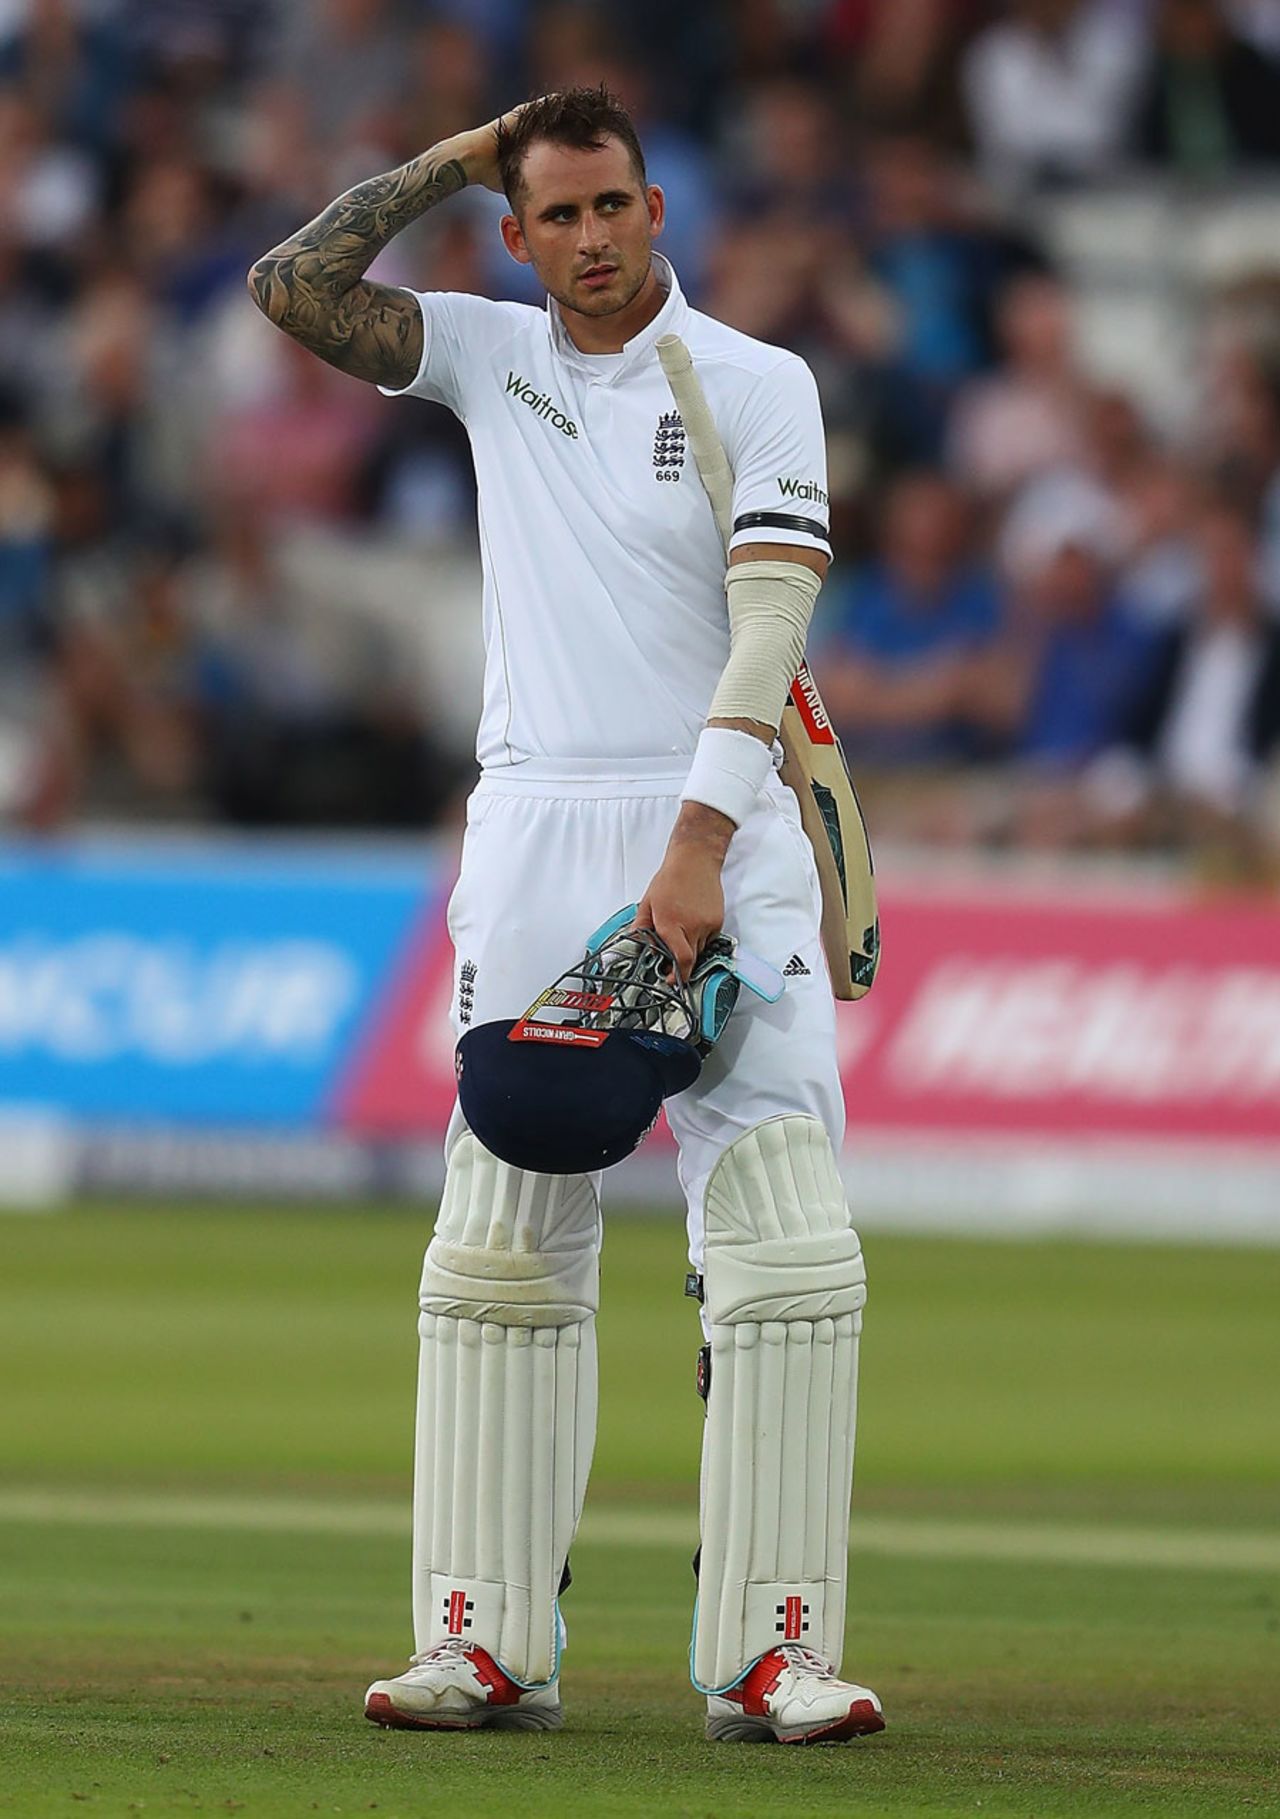 Alex Hales referred unsuccessfully after being given out on 94, England v Sri Lanka, 3rd Investec Test, Lord's, 4th day, June 12, 2016